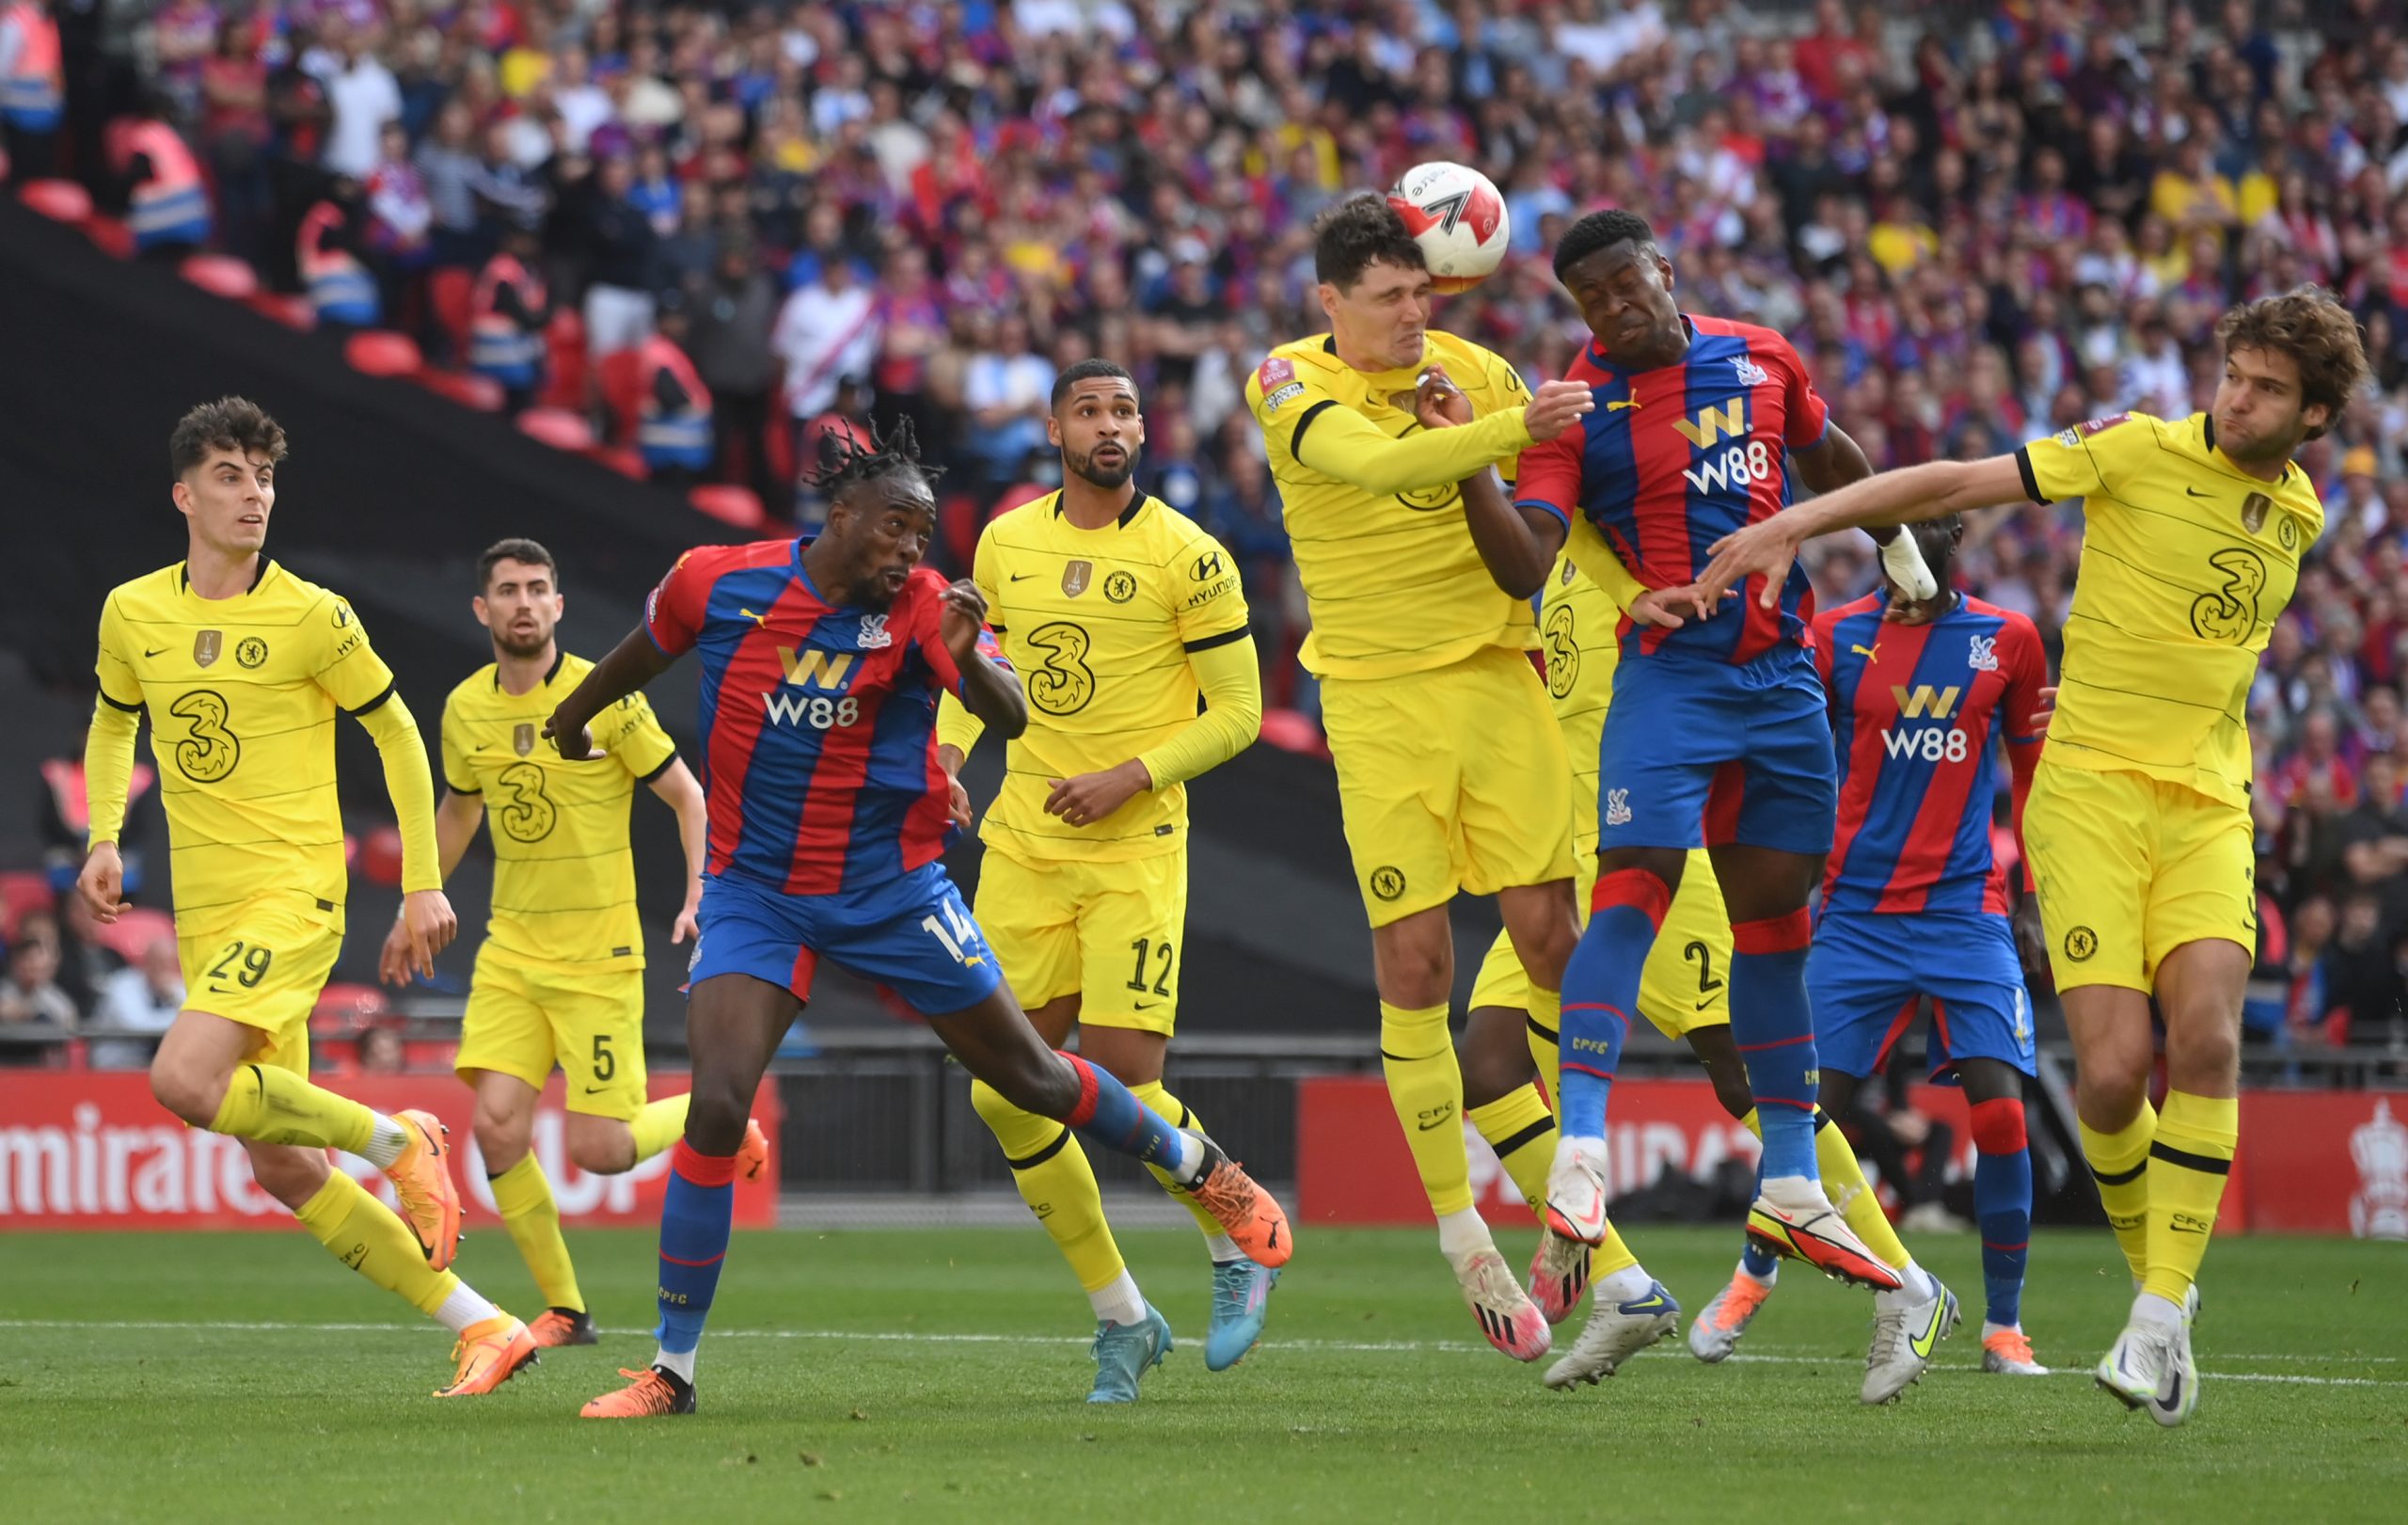 Chelsea beat Crystal Palace in the FA Cup semi-final. (Photo by Mike Hewitt/Getty Images)